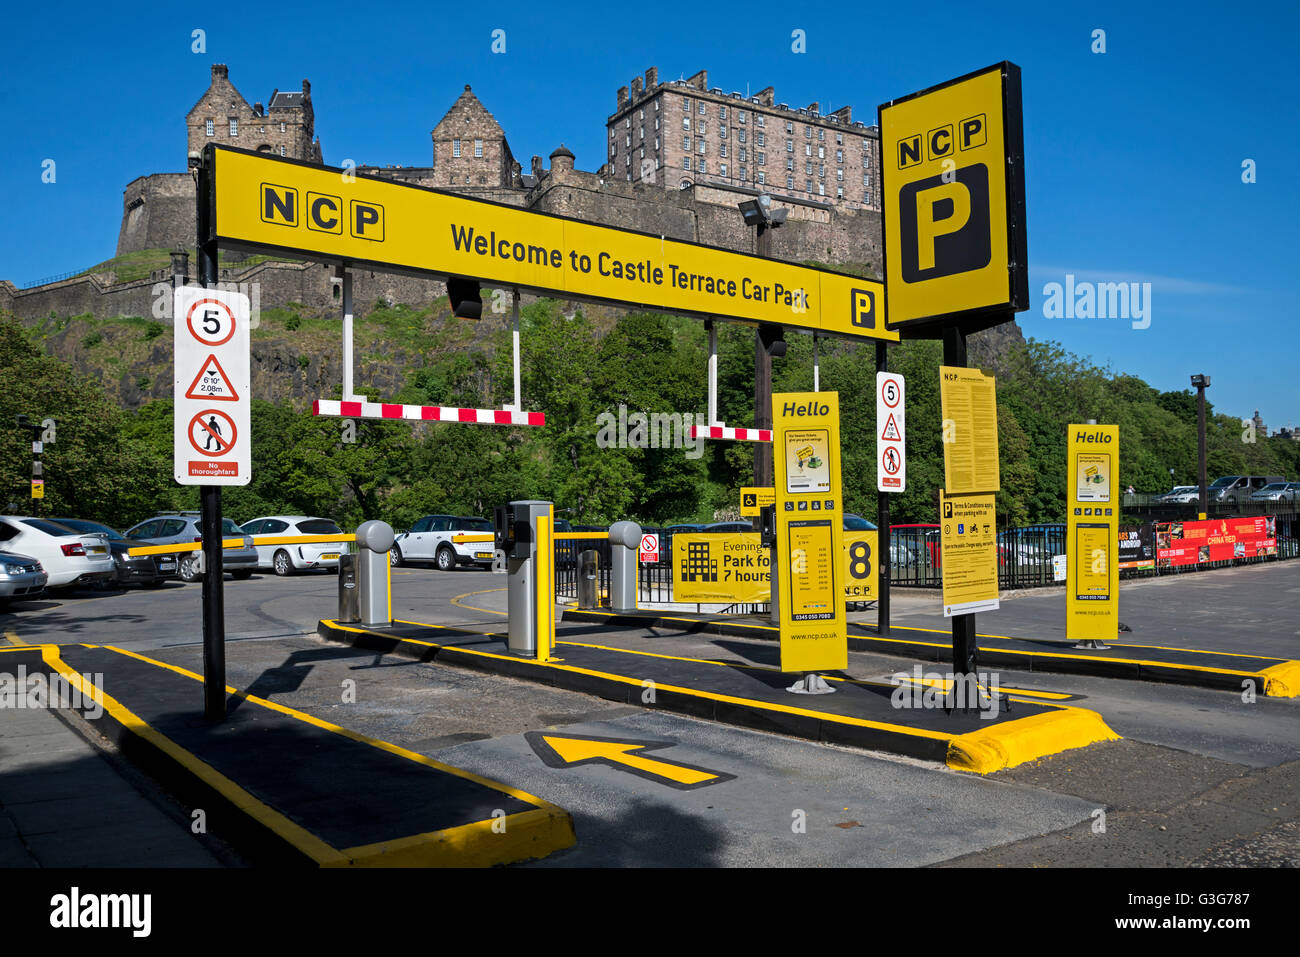 Entrance to the NCP Car park on Castle Terrace with Edinburgh Castle in the background. Stock Photo